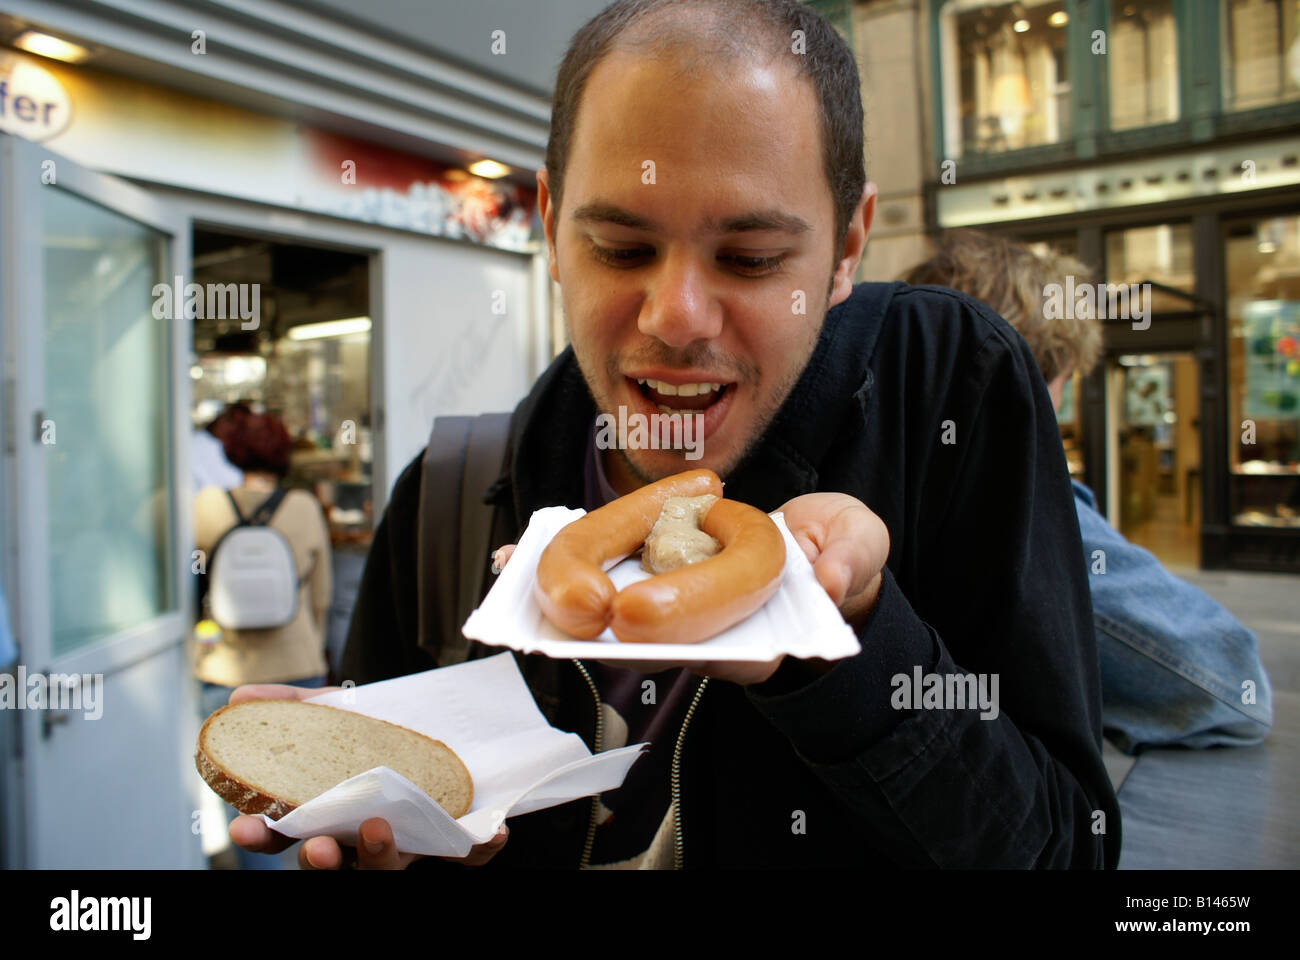 man eating a wienerwurst (sausage from Vienna) Stock Photo